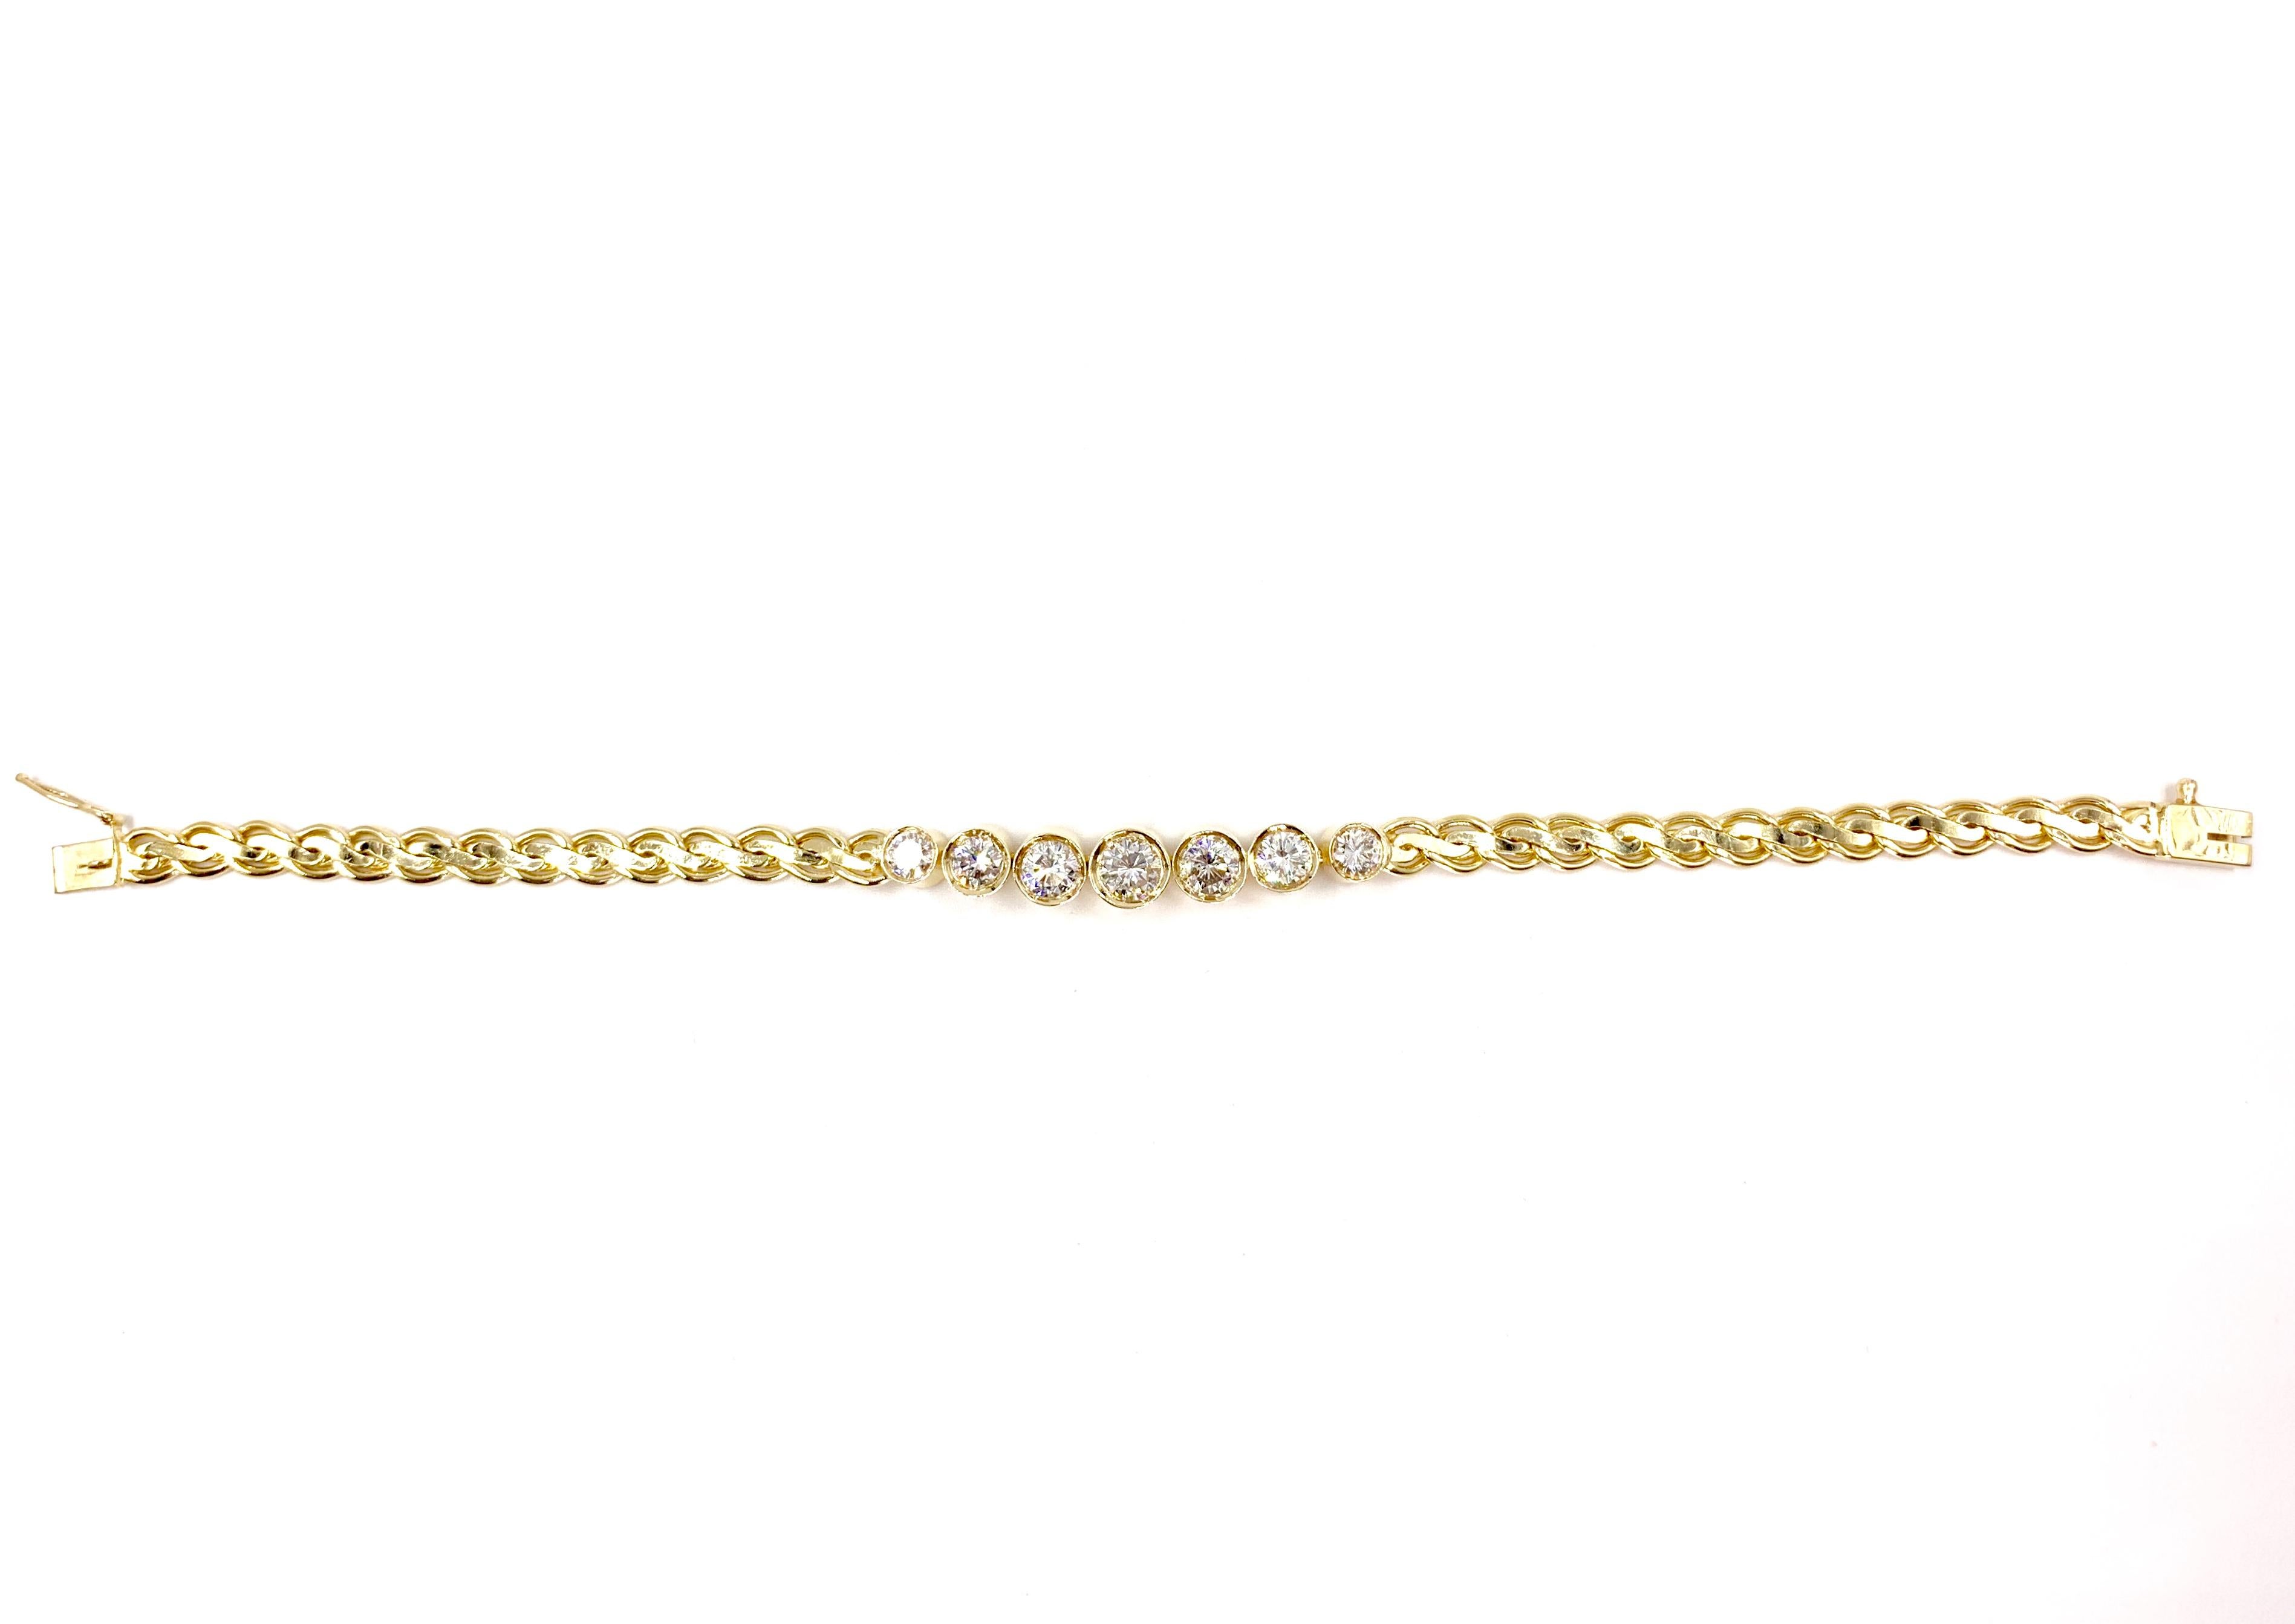 A classic and wearable bracelet featuring seven sizable round brilliant bezel set diamonds in the center of a 14 karat yellow gold polished flat fancy link chain. Diamonds have an approximate total weight of 3 carats with the center largest diamond